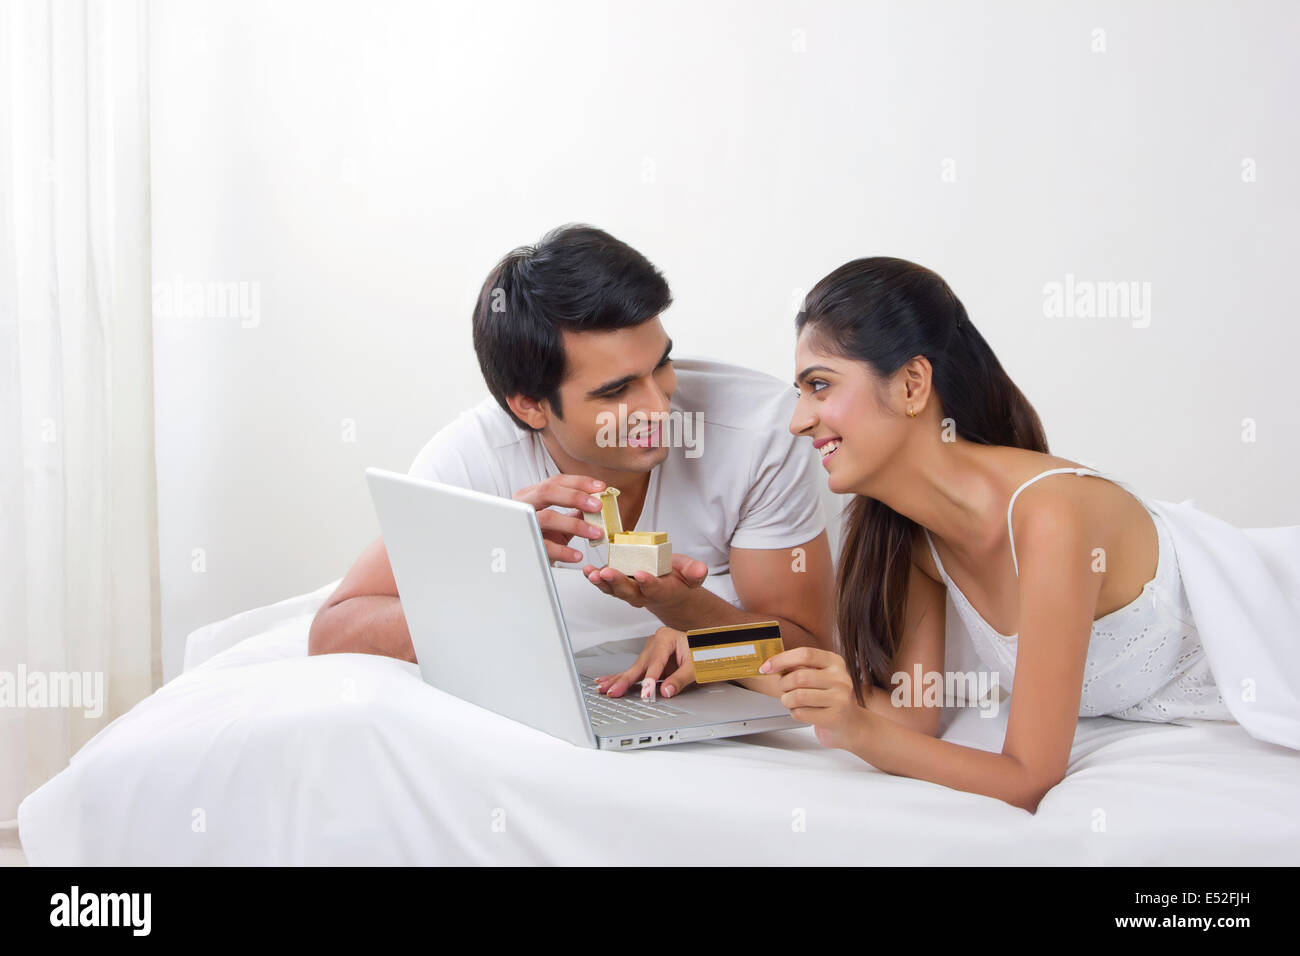 Young man opening ring box with woman shopping online with credit card in bed Stock Photo